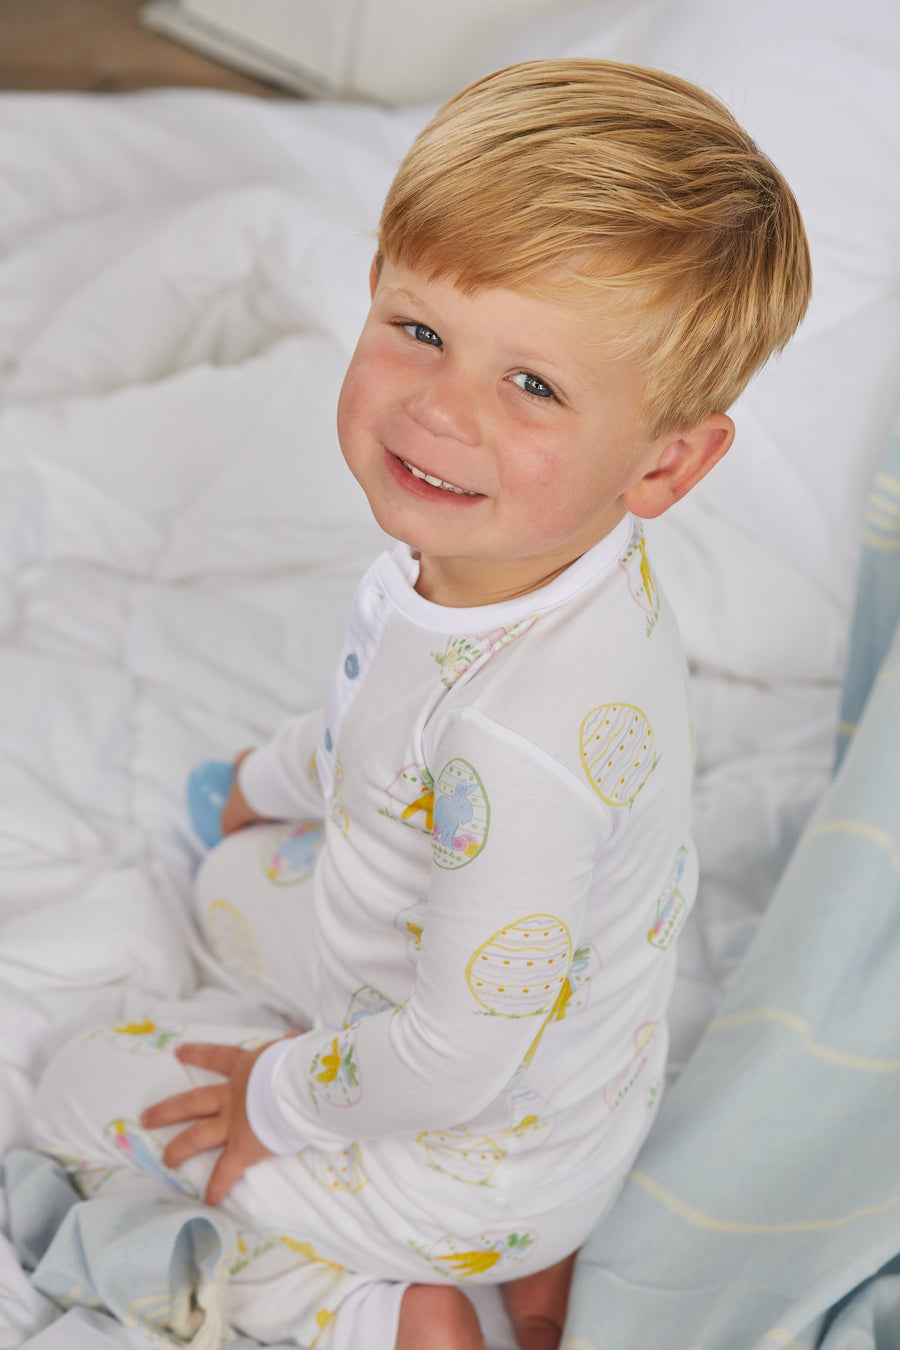 Little English classic children's clothing, boys long-sleeved jammies with printed Easter egg motif